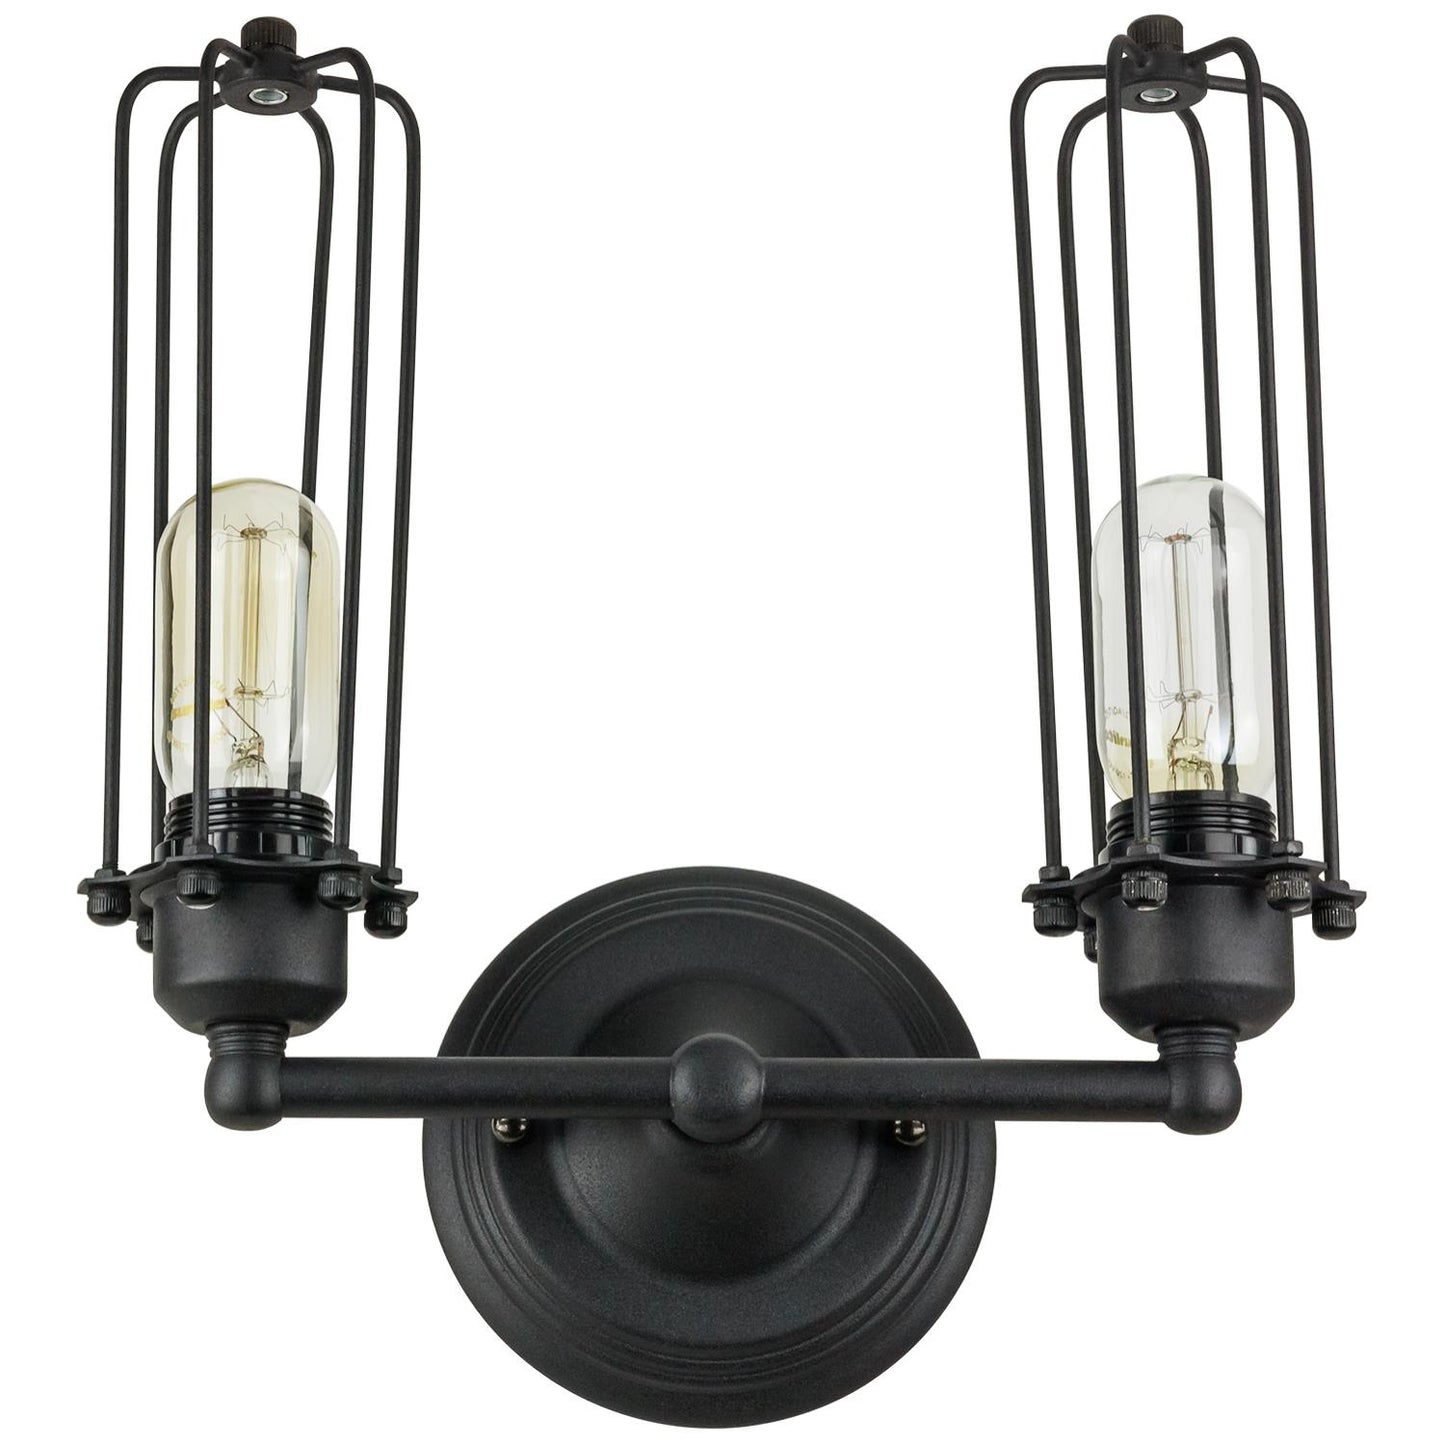 Sunlite 2 Wall Cage Wall Sconce Vintage Antique Style Fixture, Matte Black Finish